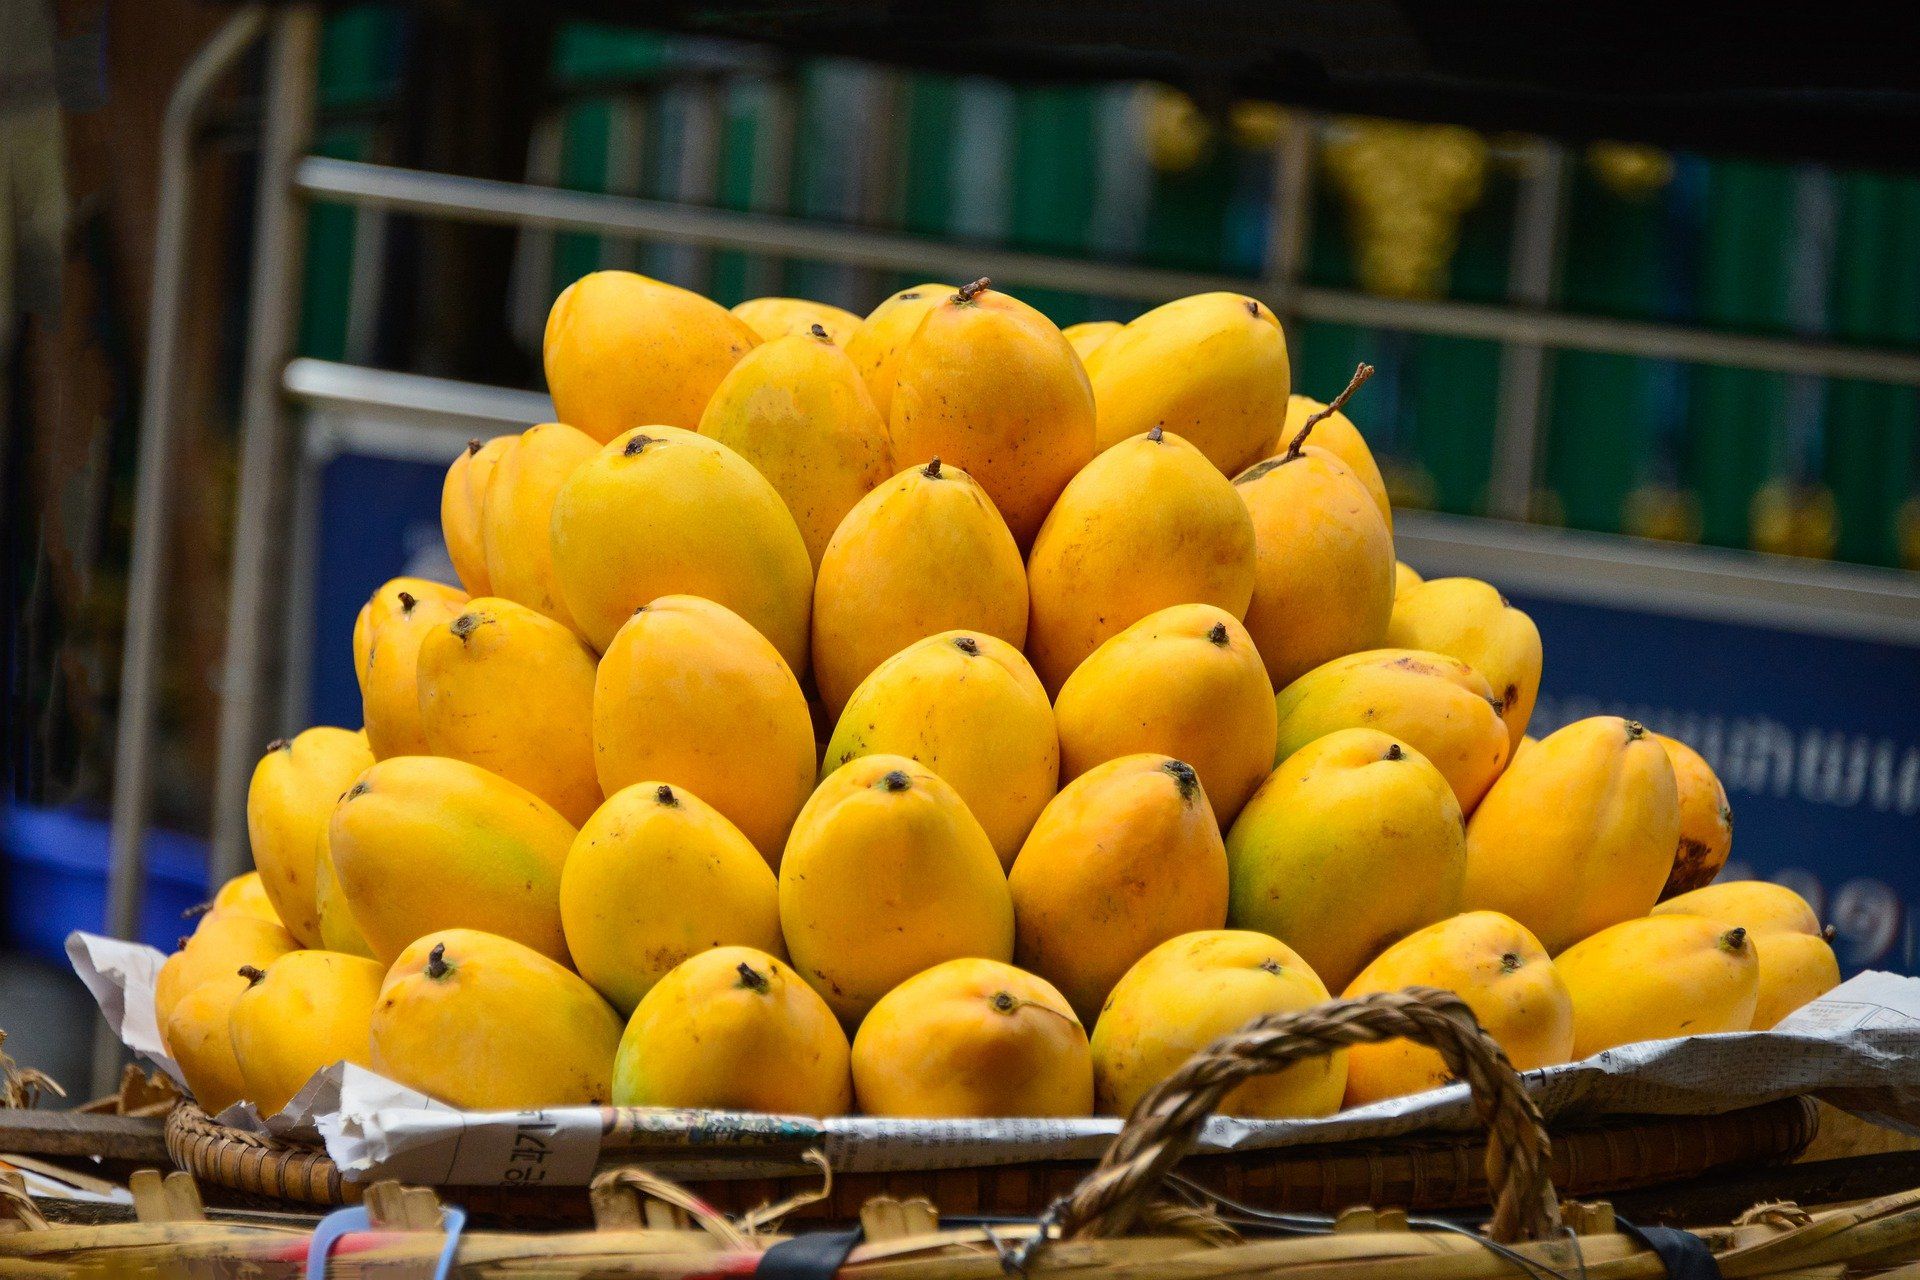 Pakistan%20comes%20up%20with%20new%20sugar-free%20variety%20of%20mangoes%20for%20diabetics